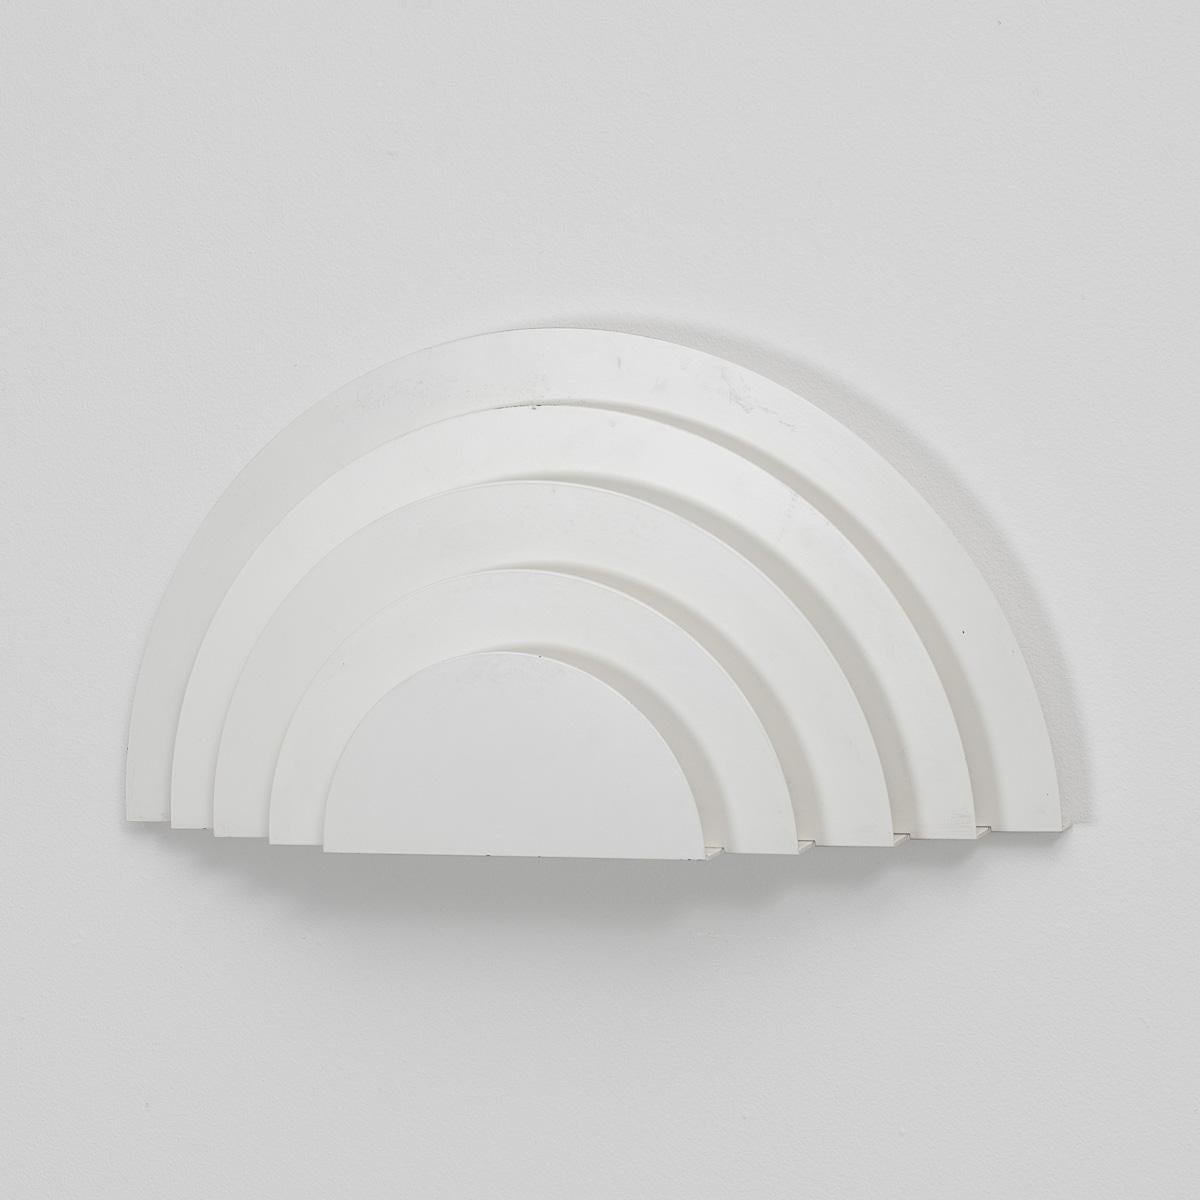 The Meander wall sconce designed by Cesare Casati and Emanuele Ponzi, was produced by RAAK, a leading manufacturer of Dutch mid-century lighting. Like the contours of a hill on a map. Or a rainbow silhouette. It is unashamedly simplistic in nature